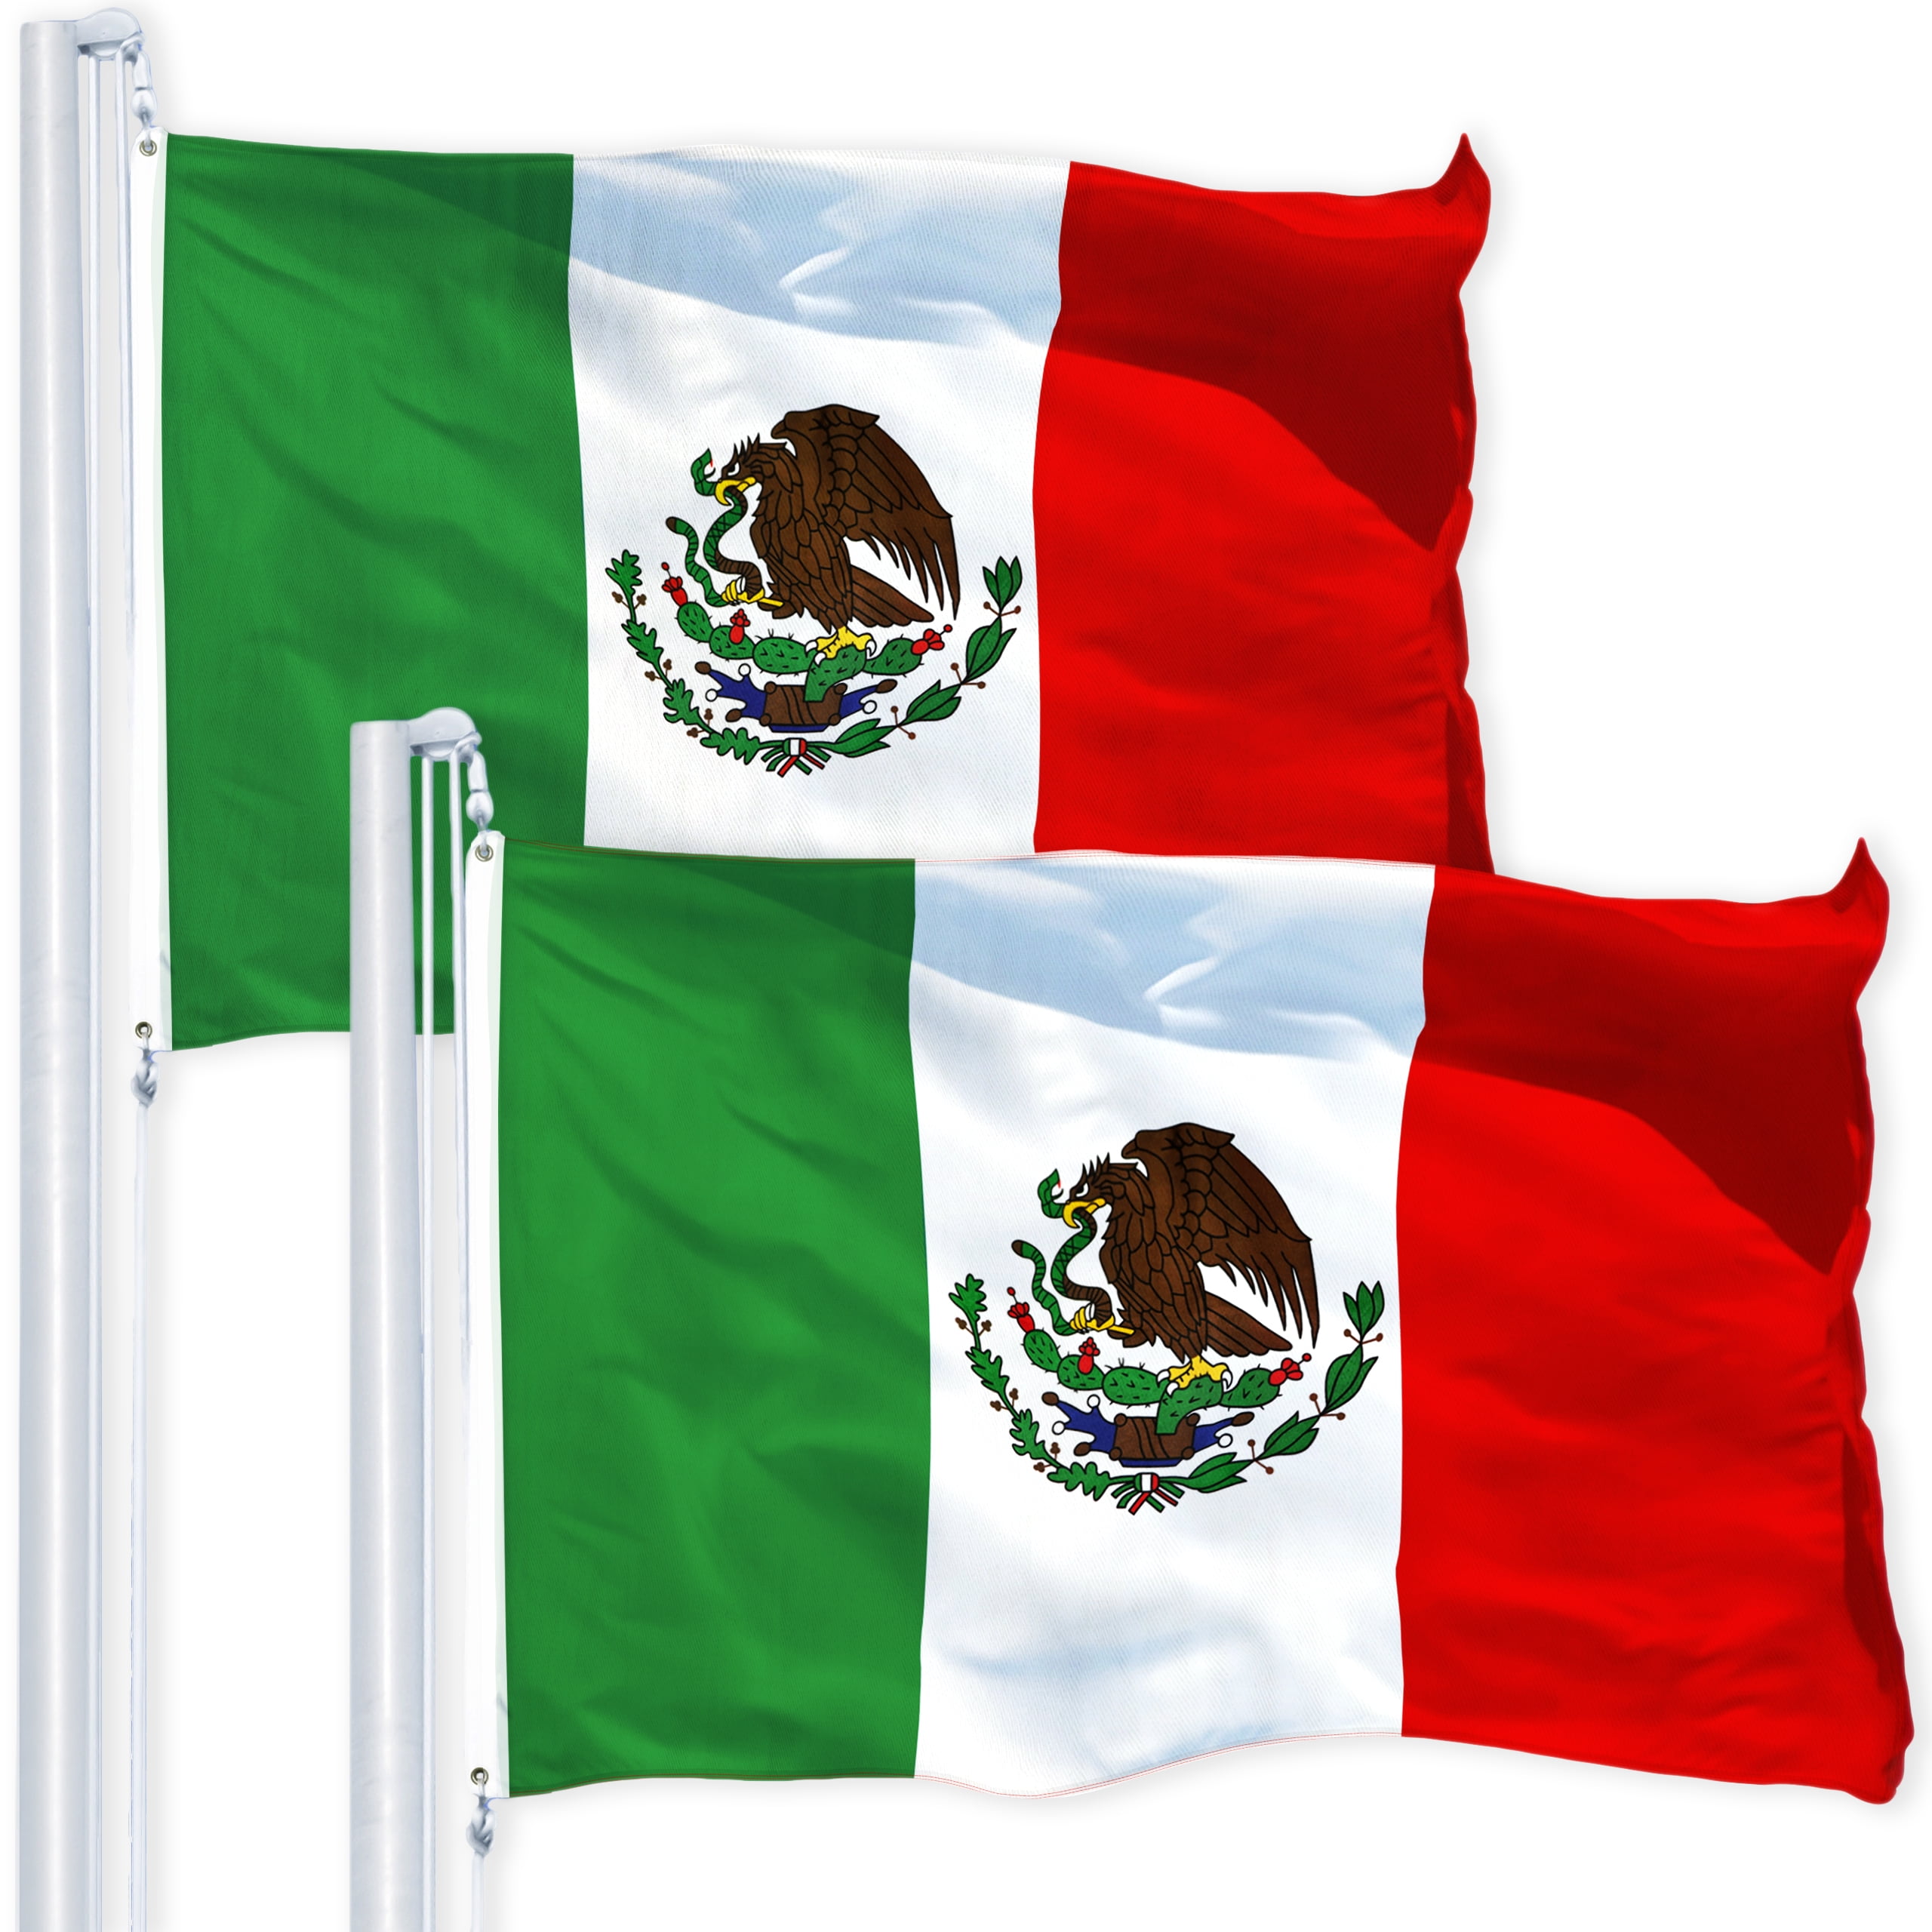 3x5 Mexico Mexican Country 100D Knitted Nylon Poly Flag 3'x5' Grommets 